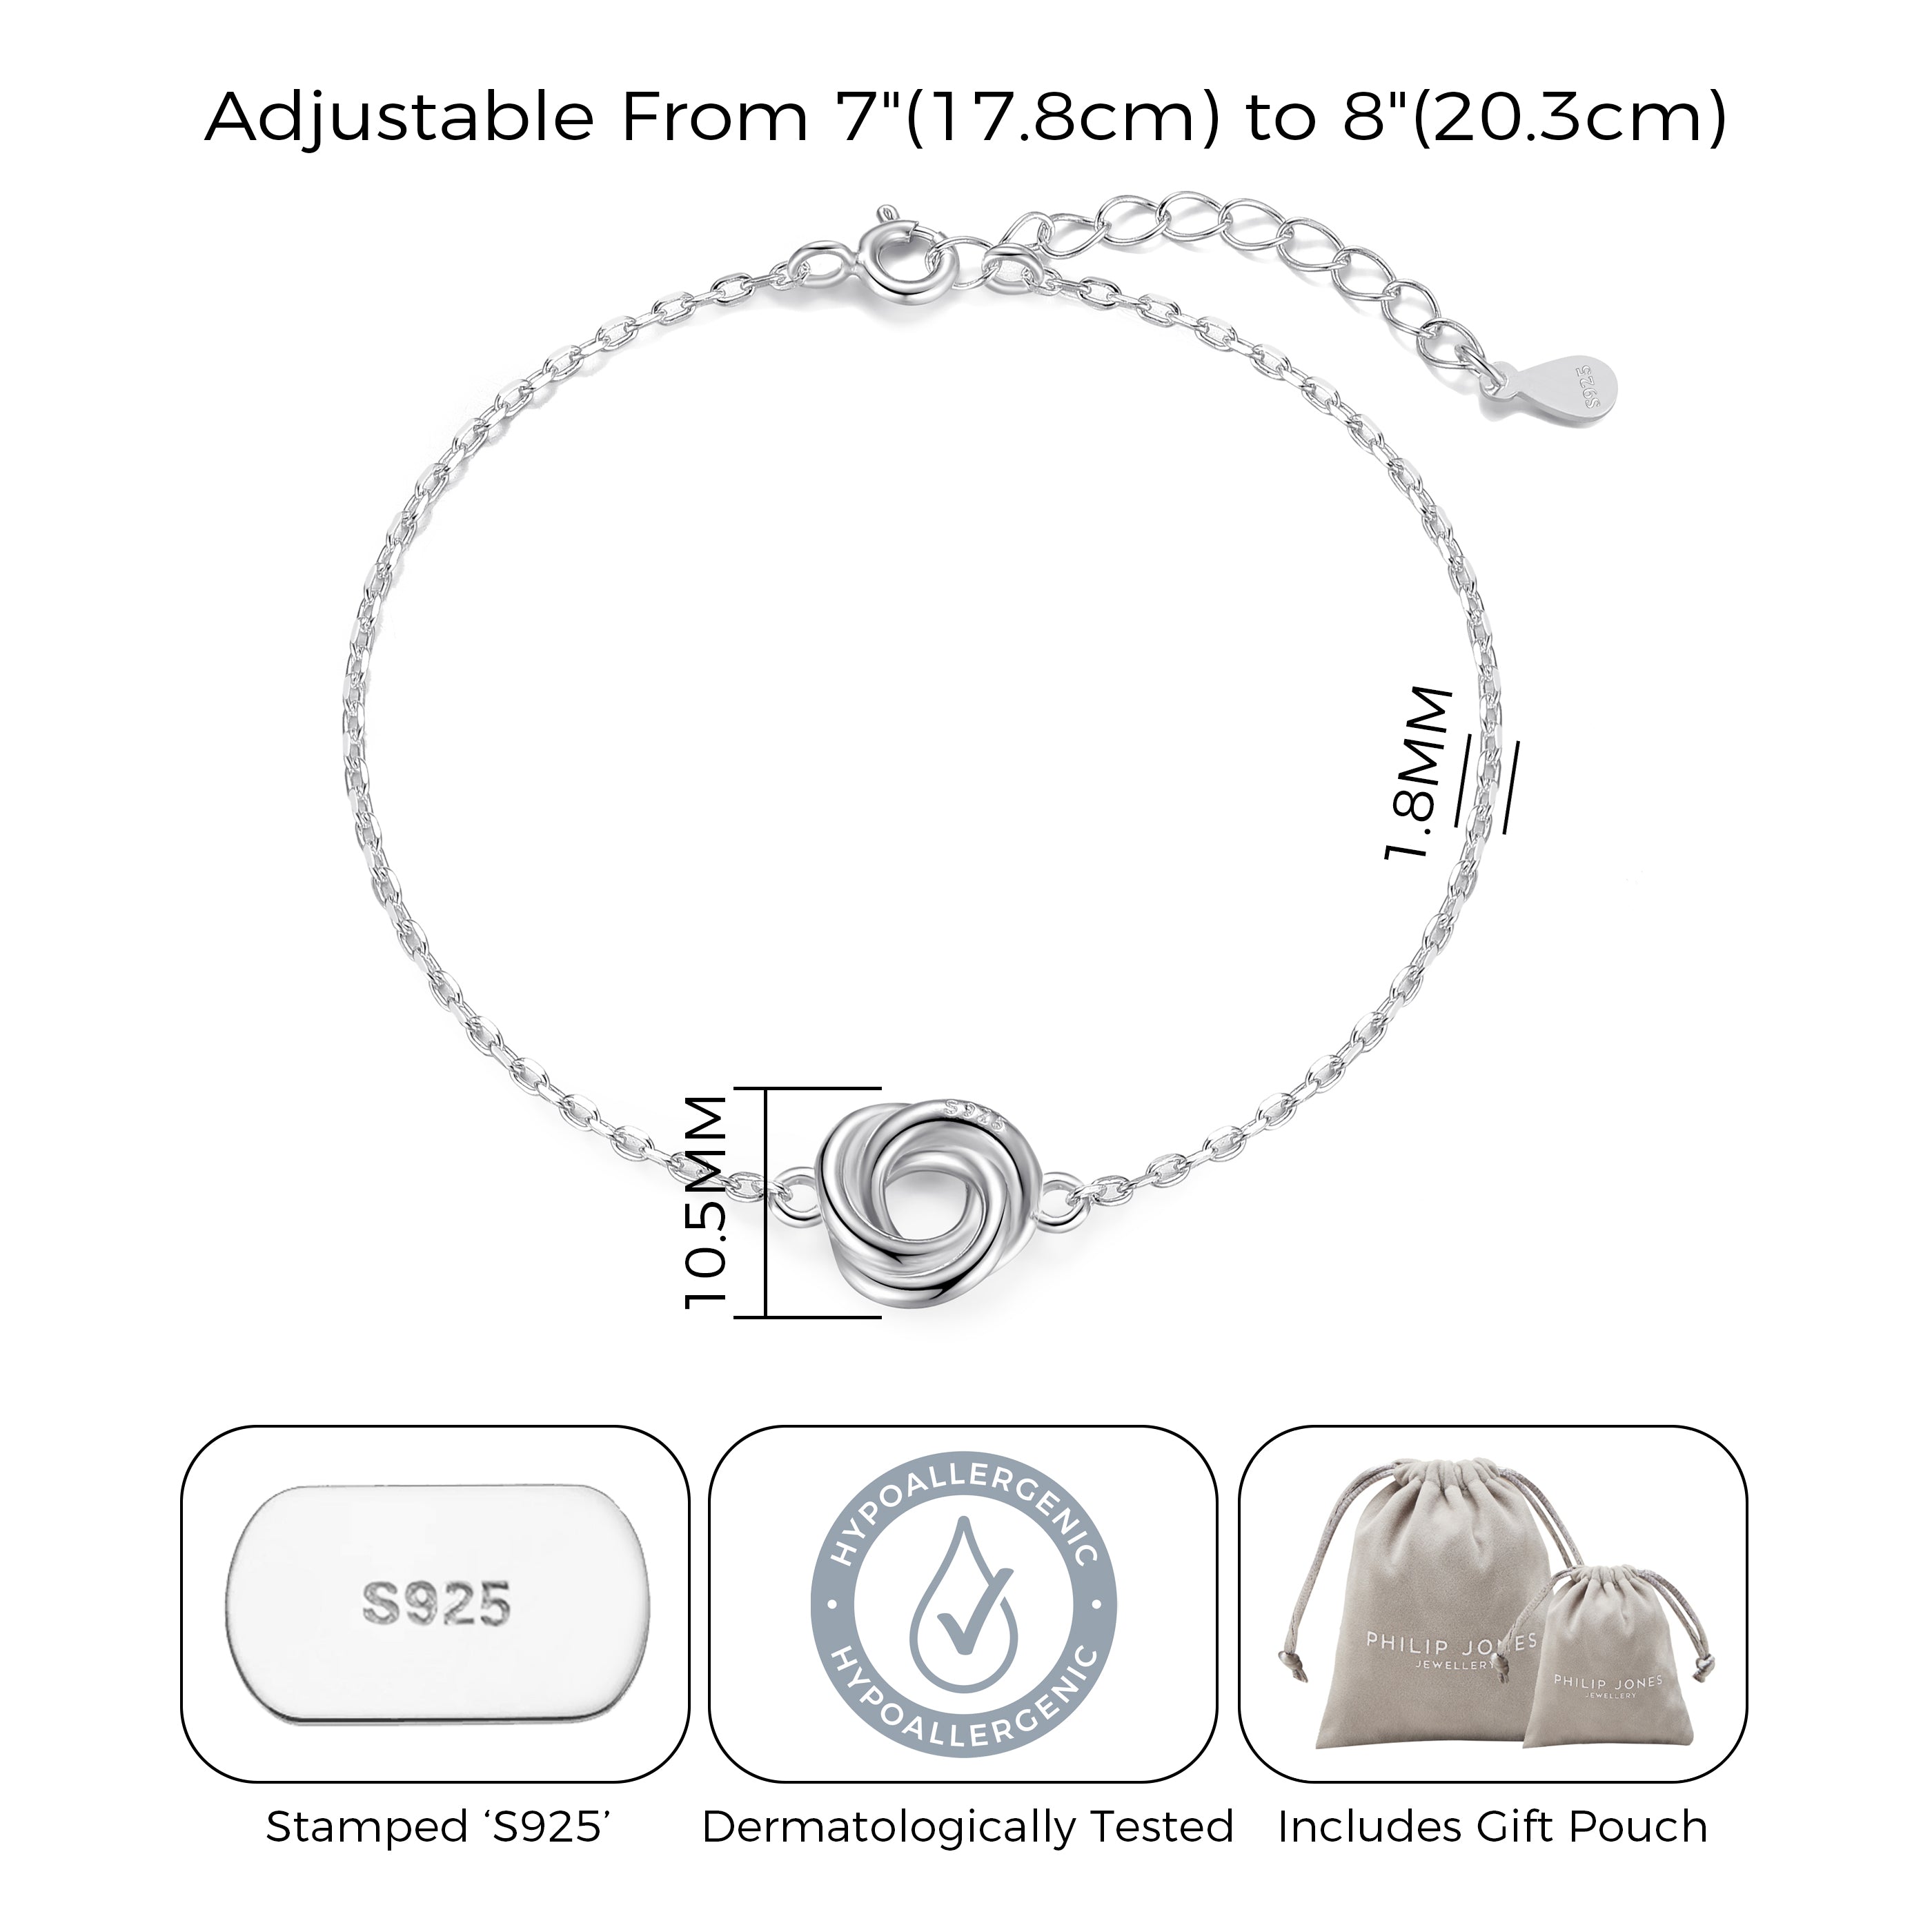 Sterling Silver Friendship Quote Knot Bracelet